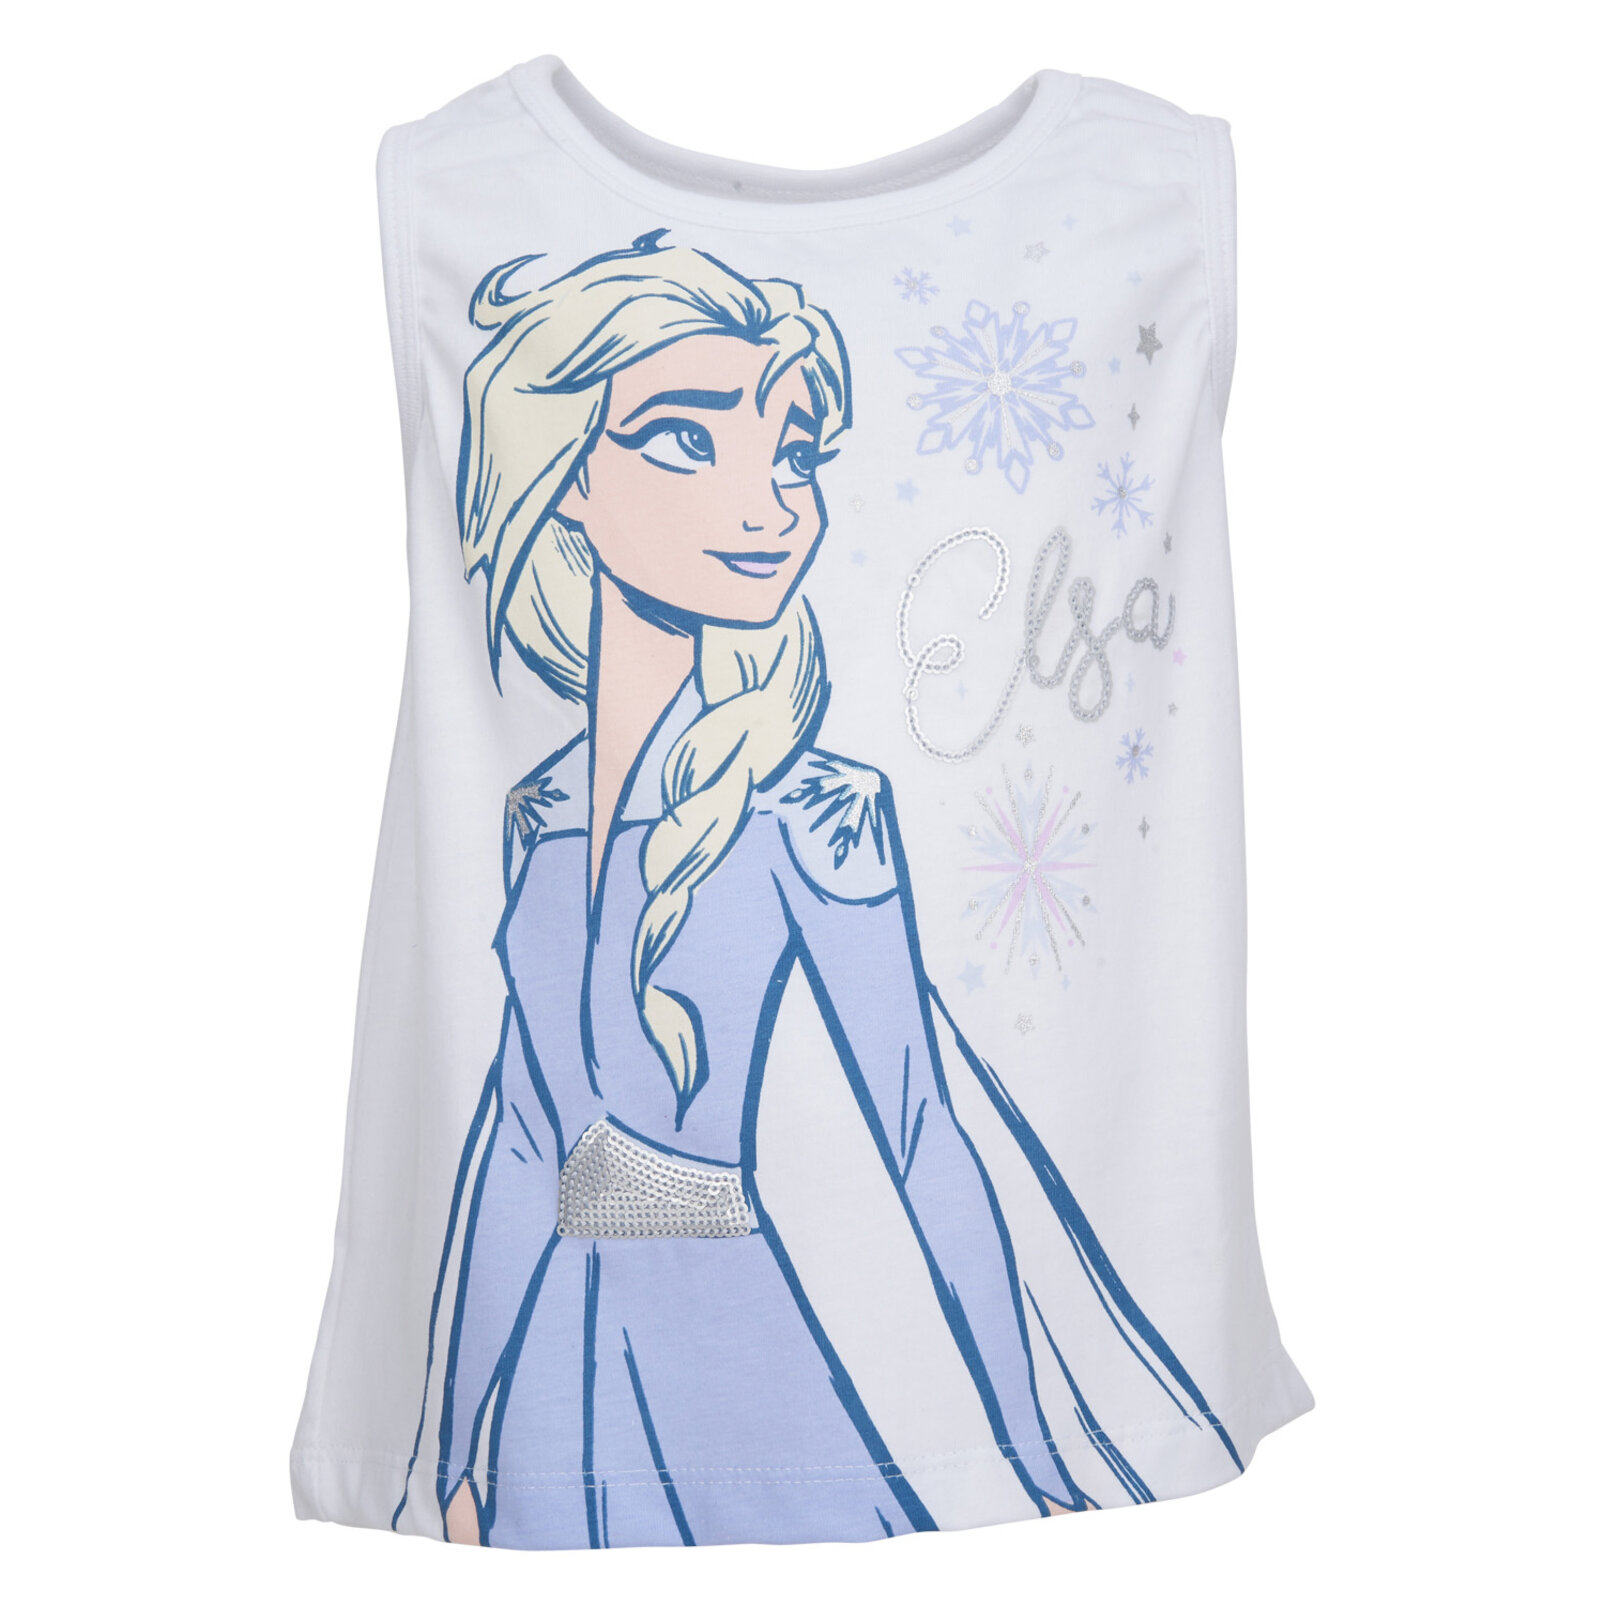 Disney Frozen Elsa Toddler Girls T-Shirt and French Terry Shorts Outfit Set White 2T - image 2 of 5